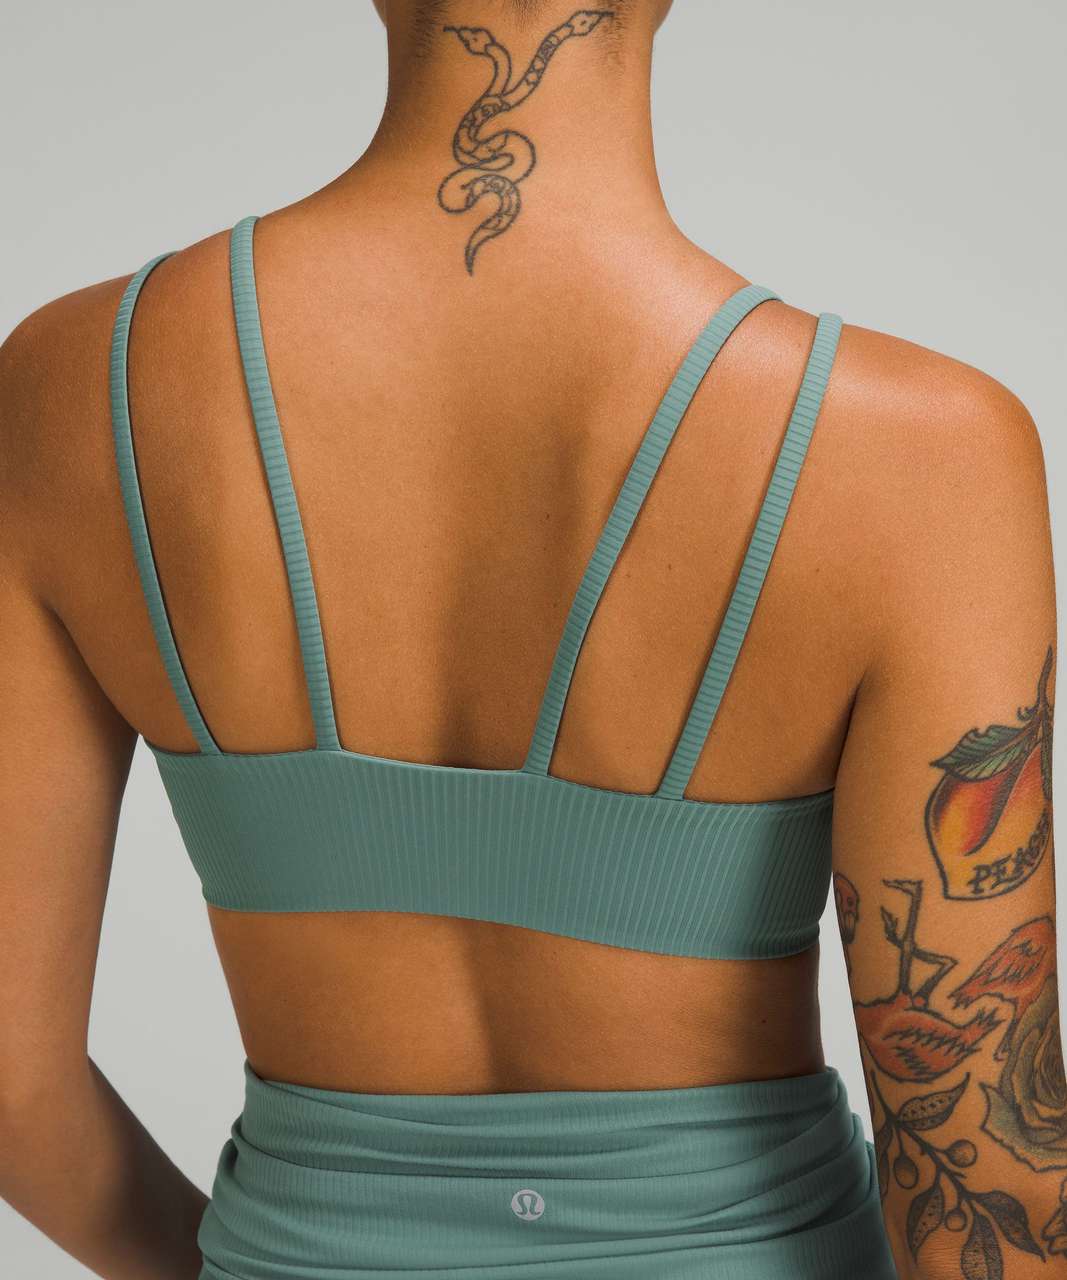 Lululemon Like a Cloud Ribbed Bra *Light Support, B/C Cup - Tidewater Teal